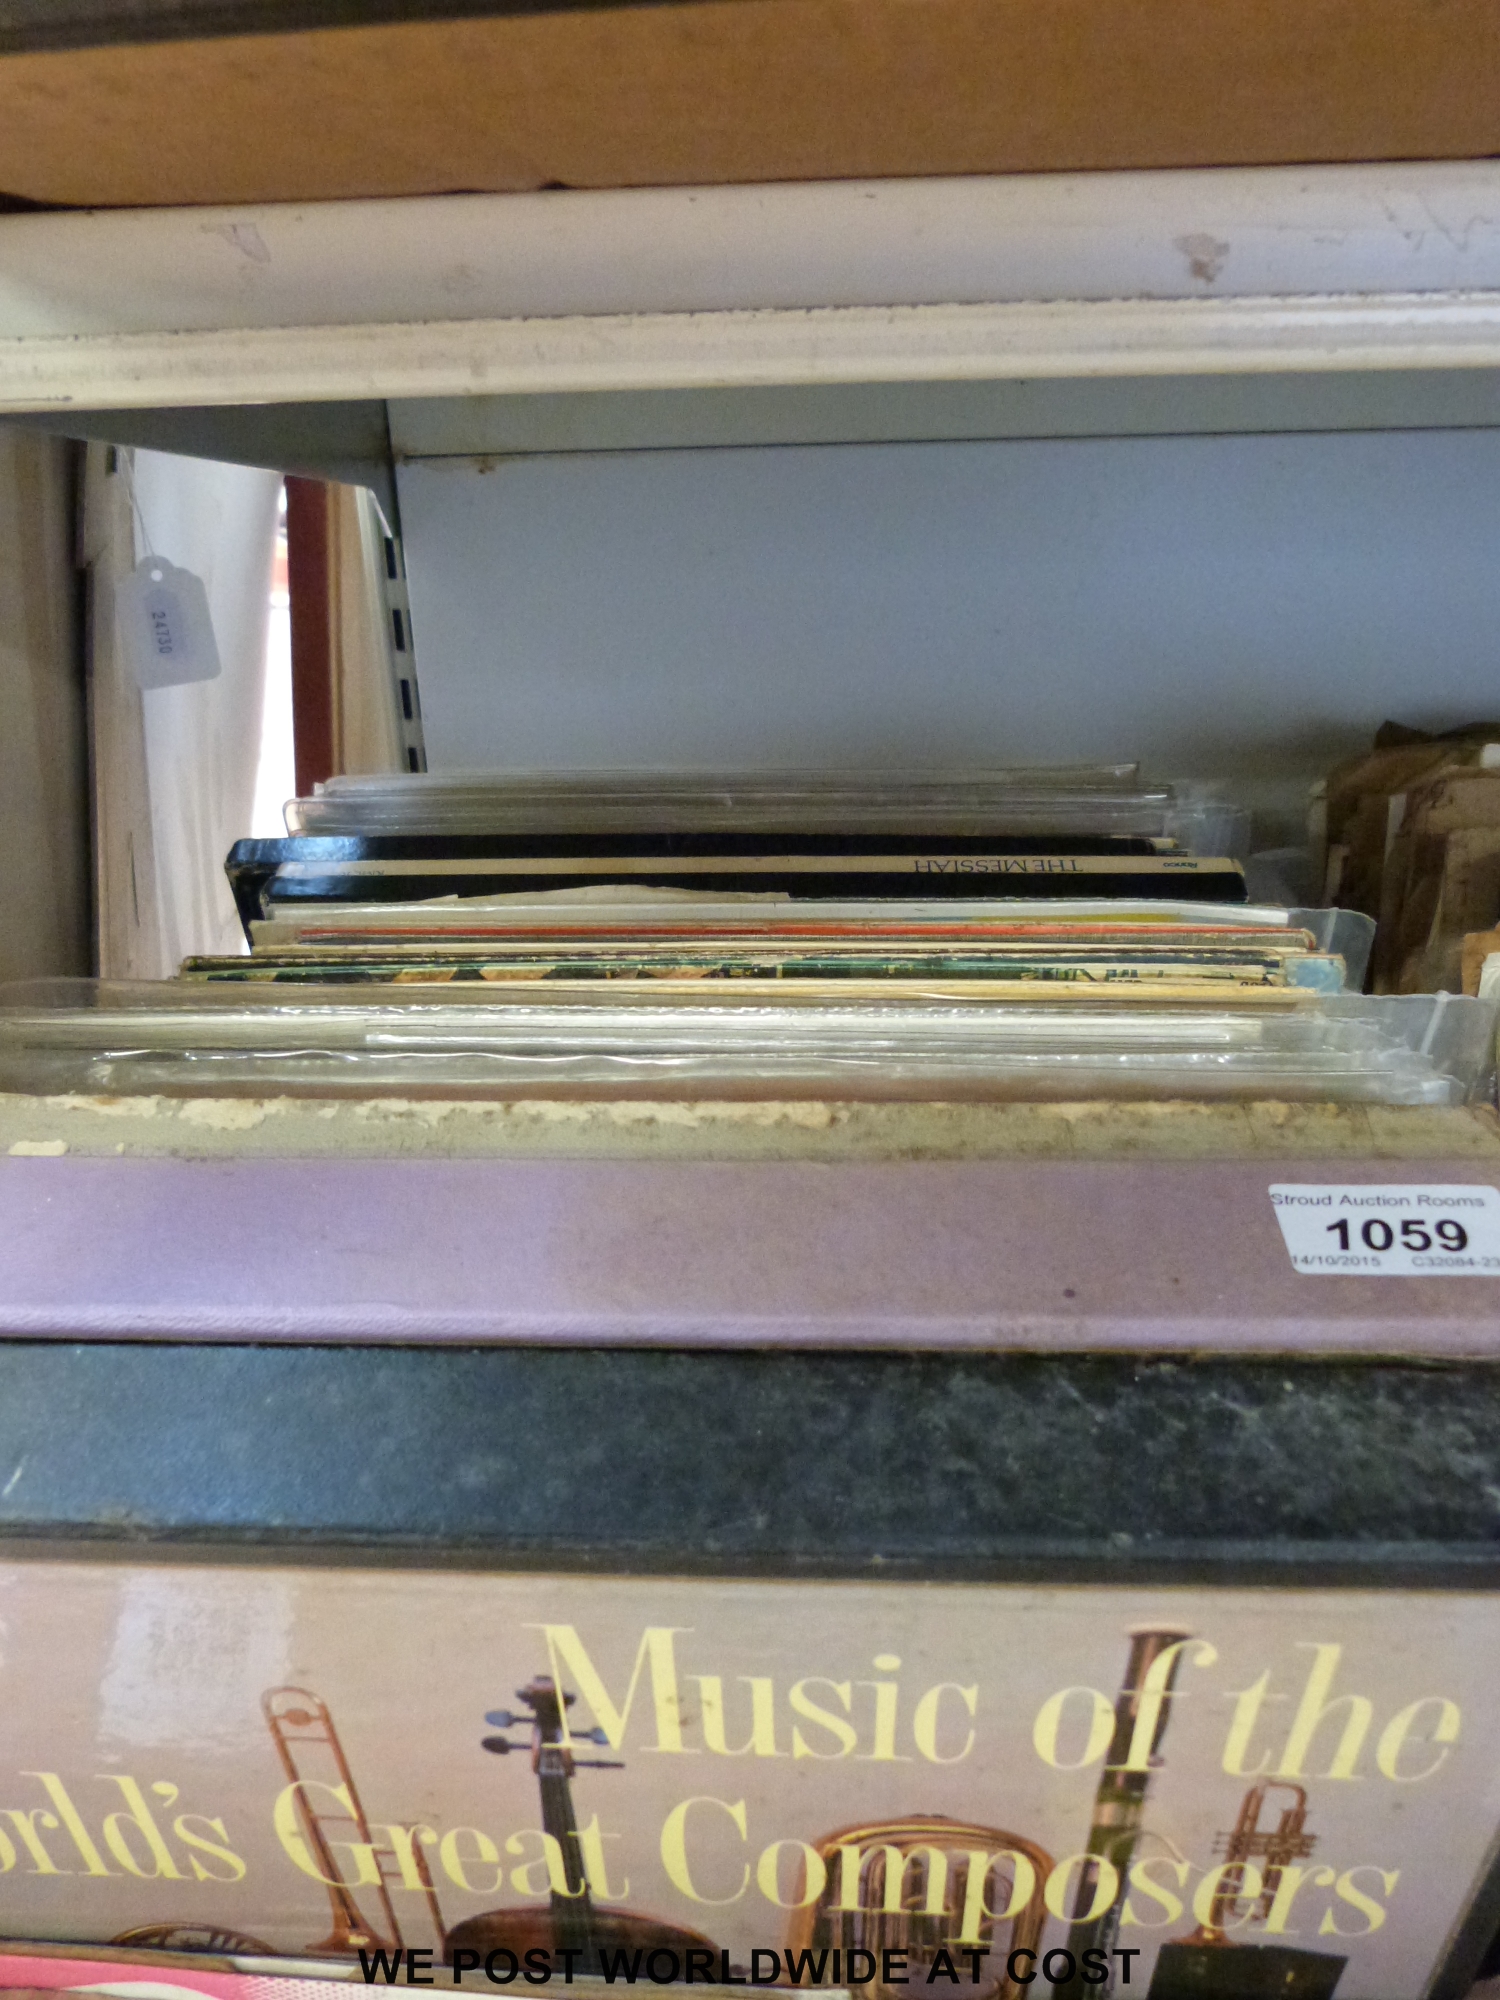 A collection of classical vinyl LP's including some boxed sets